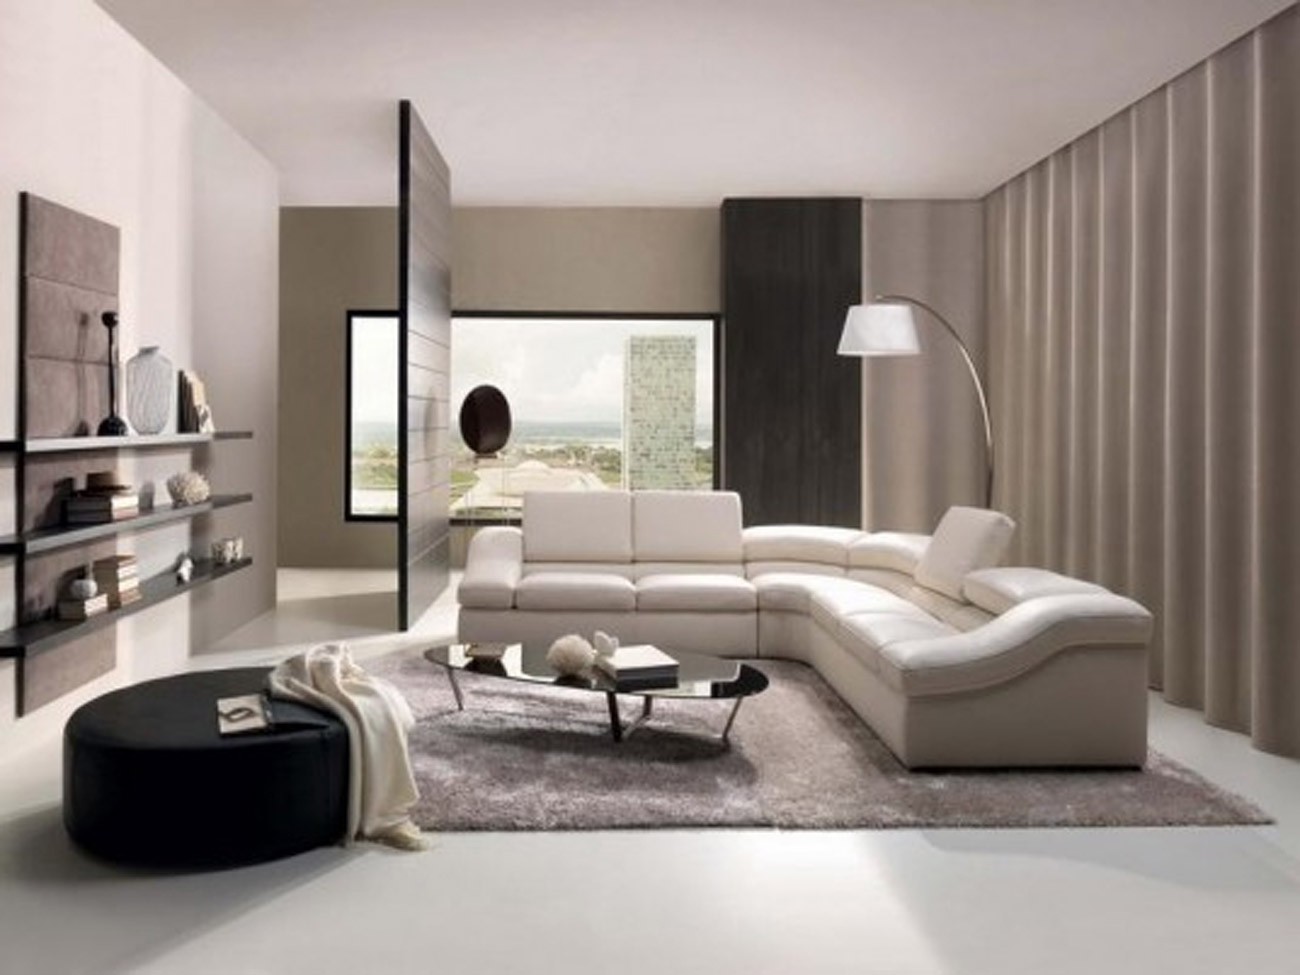 Living Room Studio Modern Living Room Furniture For Studio Apartments Design Ideas With Extra Thick Carpet Design Also Interesting White Leather Modern Sofa Plus Creative Bed Lamp Idea Living Room Find Suitable Living Room Furniture With Your Style